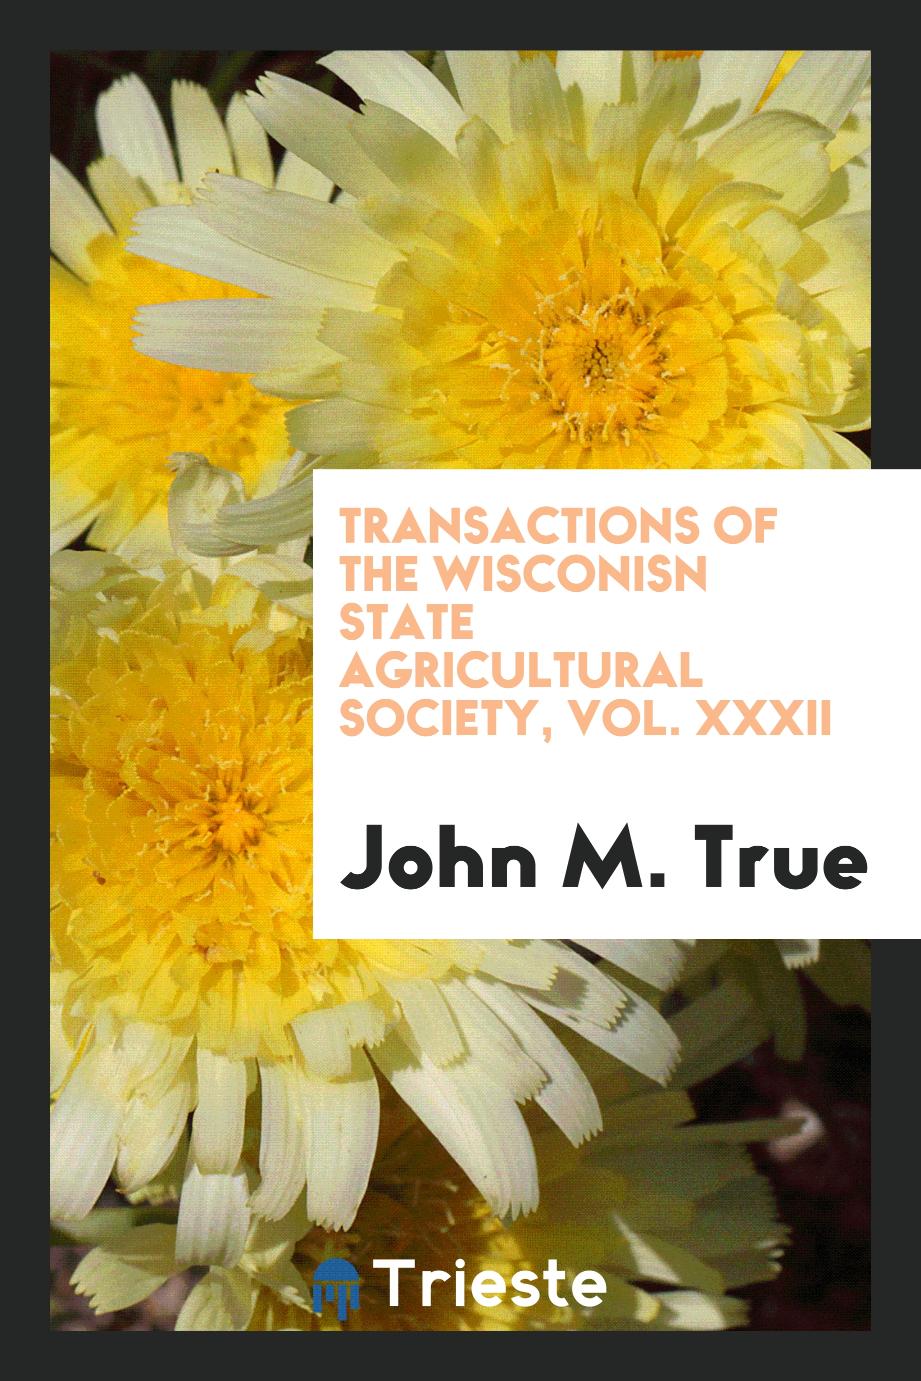 Transactions of the Wisconisn State Agricultural Society, Vol. XXXII